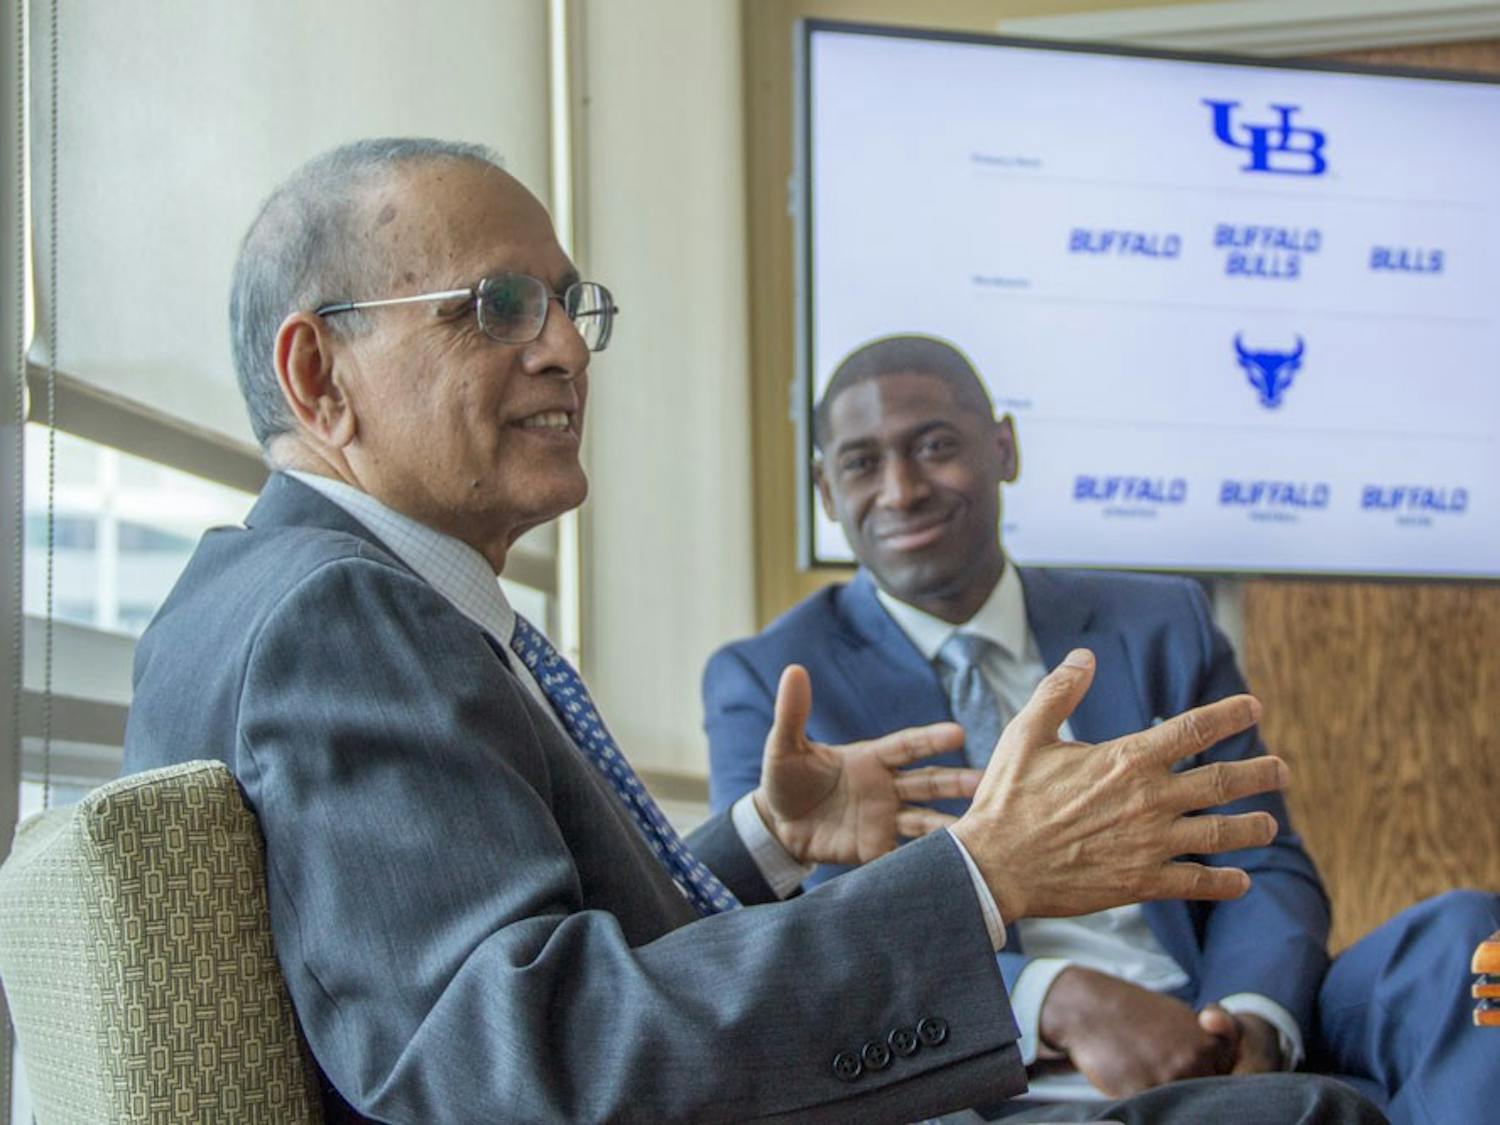 Satish Tripathi (front), UB president and Allen Greene, UB Athletic Director (back) discuss UB’s recently launched branding initiative, which looks to unite all of UB’s schools and units around the “University at Buffalo” name.